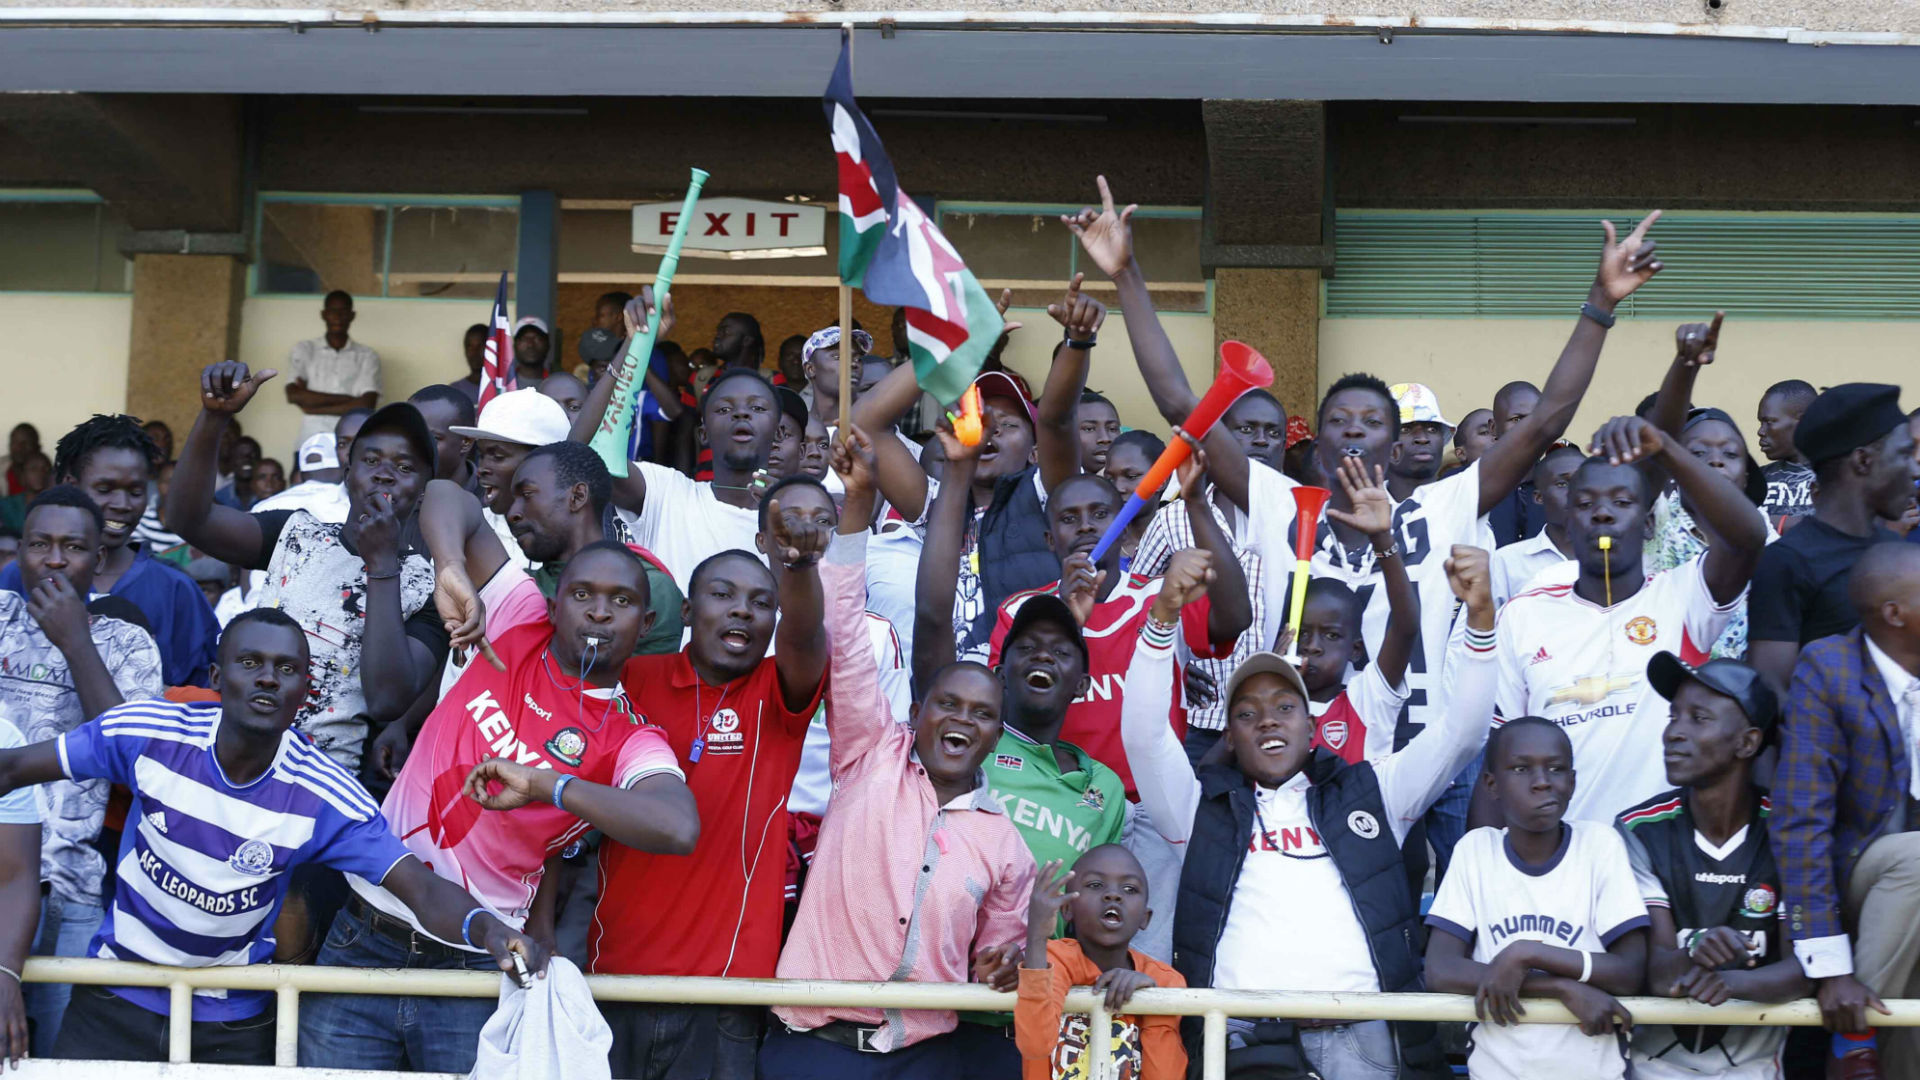 'We are not settling for mediocrity' - Mulama defends fans on Harambee Stars demands